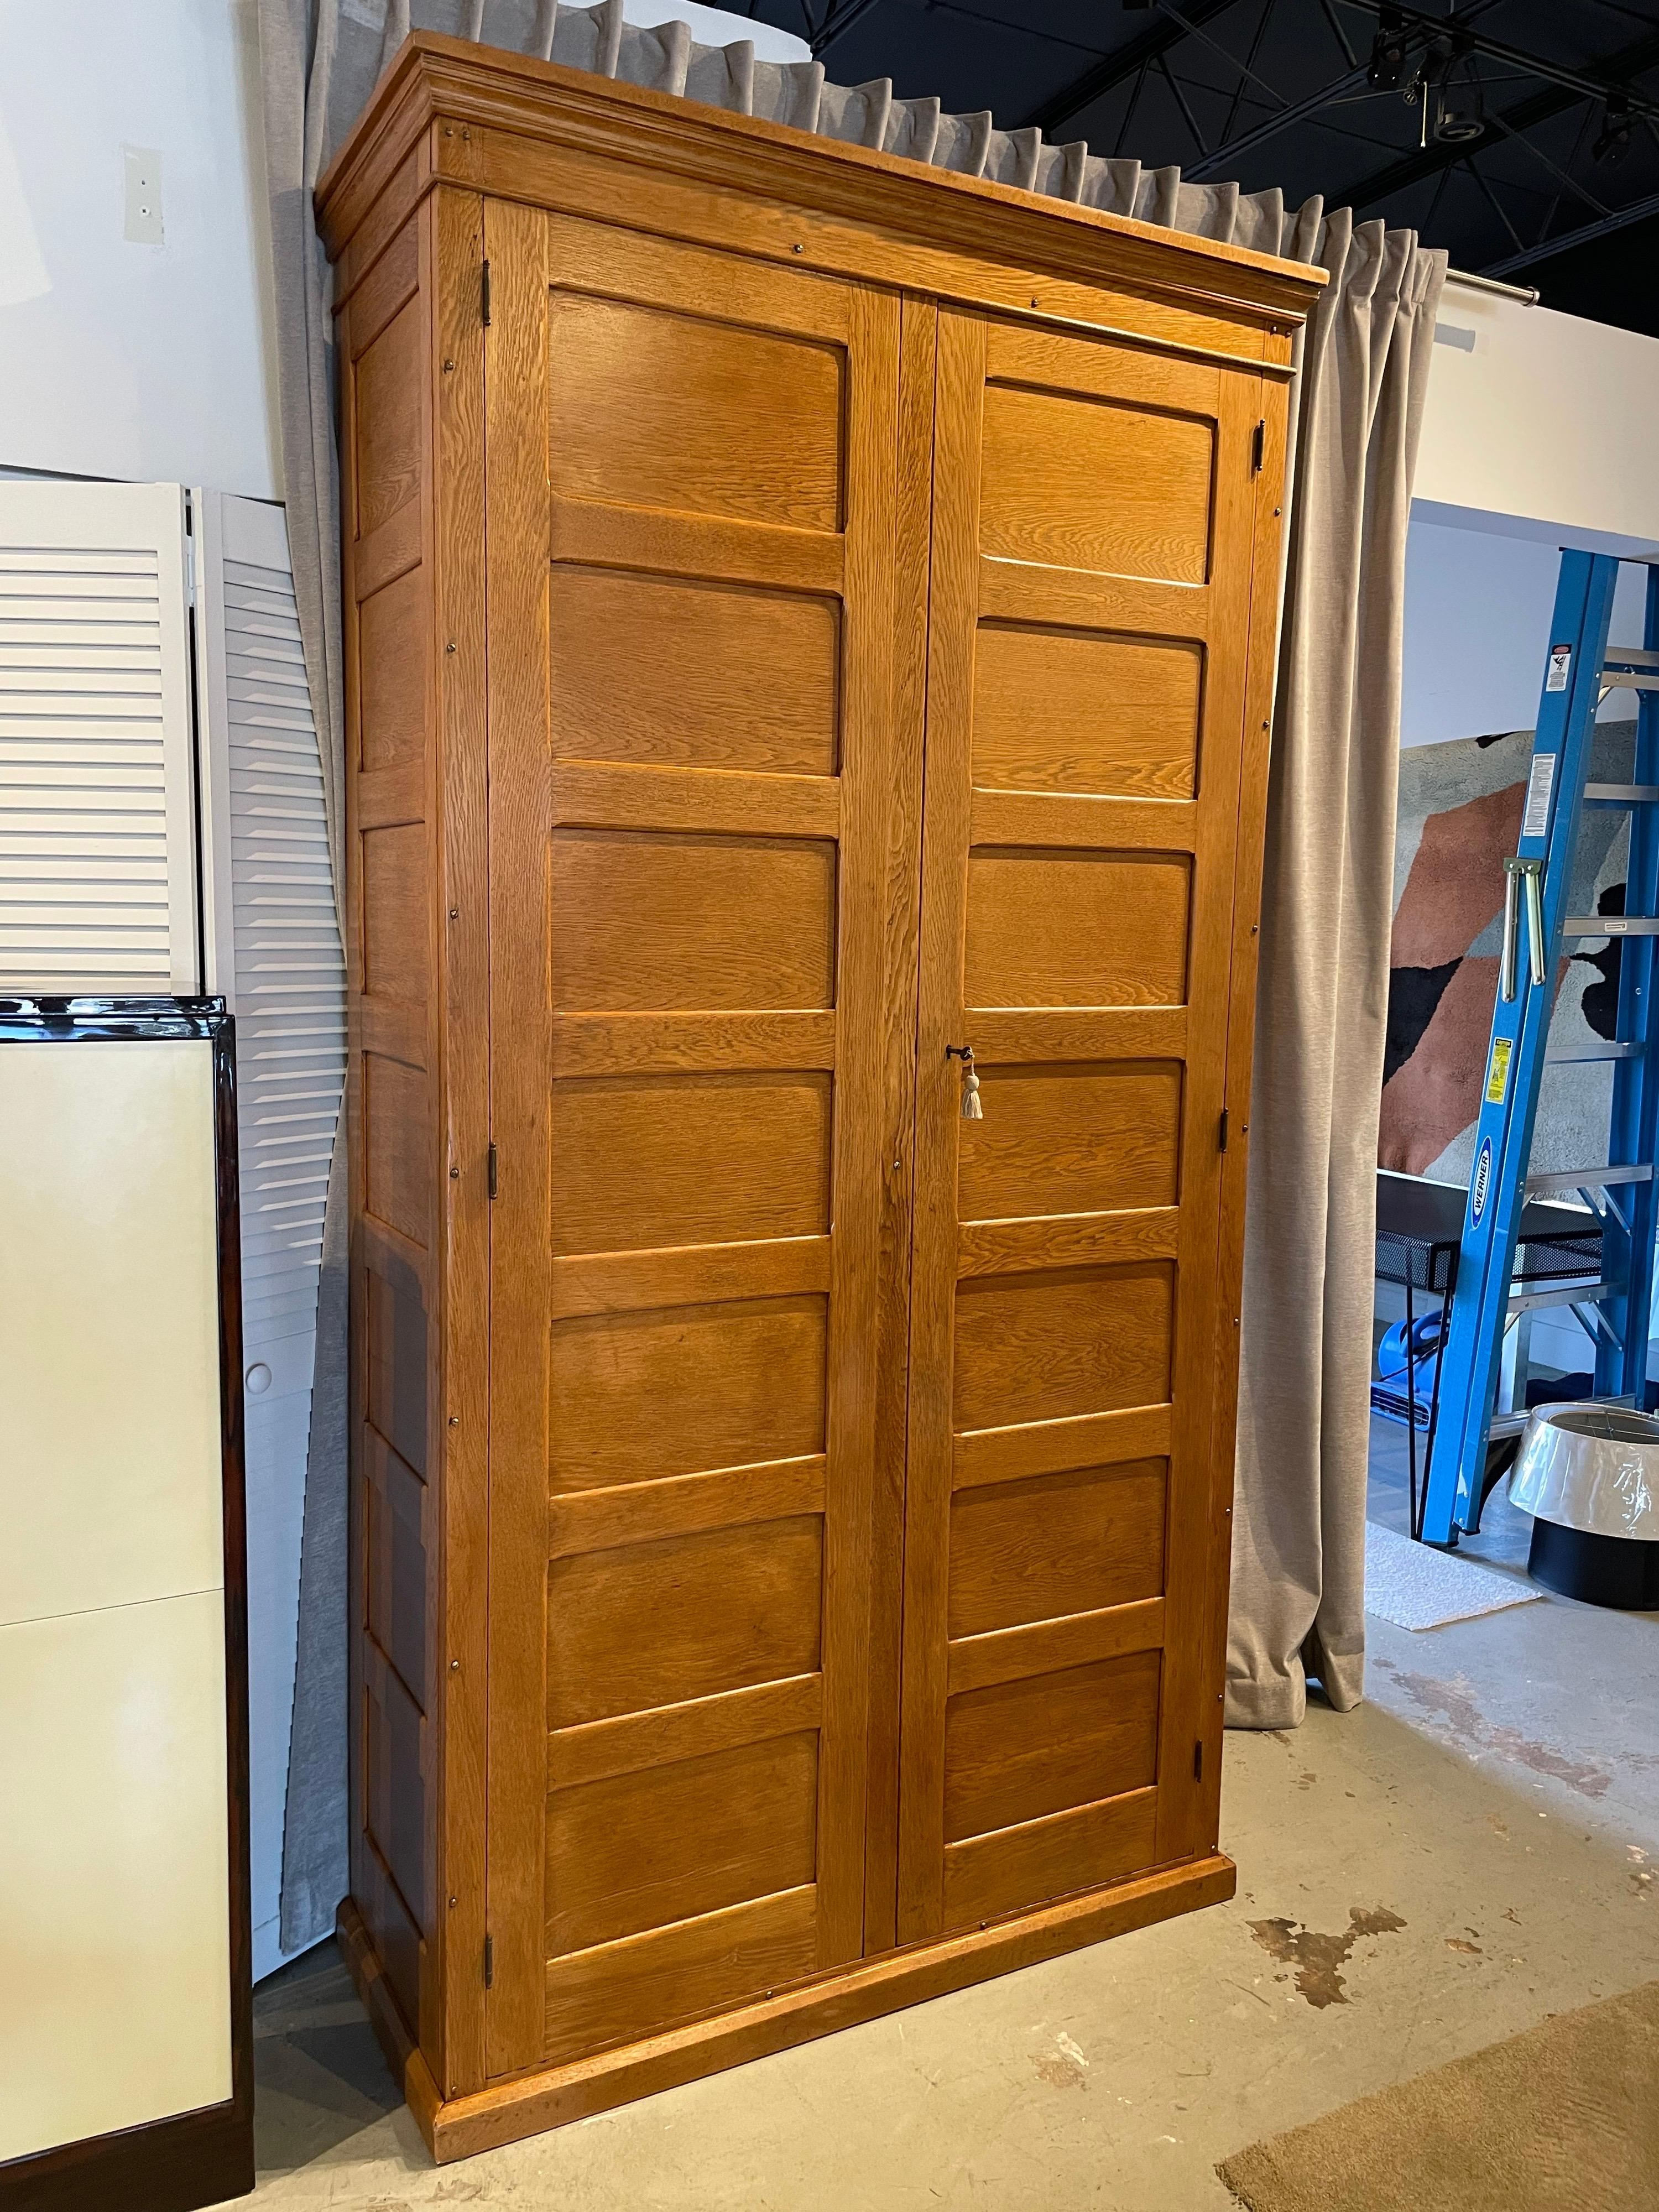 This is a wonderful natural oak cabinet with inset panels and two large doors which open to deep and wide shelving. Original key and lock. This has been lightly restored and the back panel to the wall was replaced. This is Jacques Adnet style with